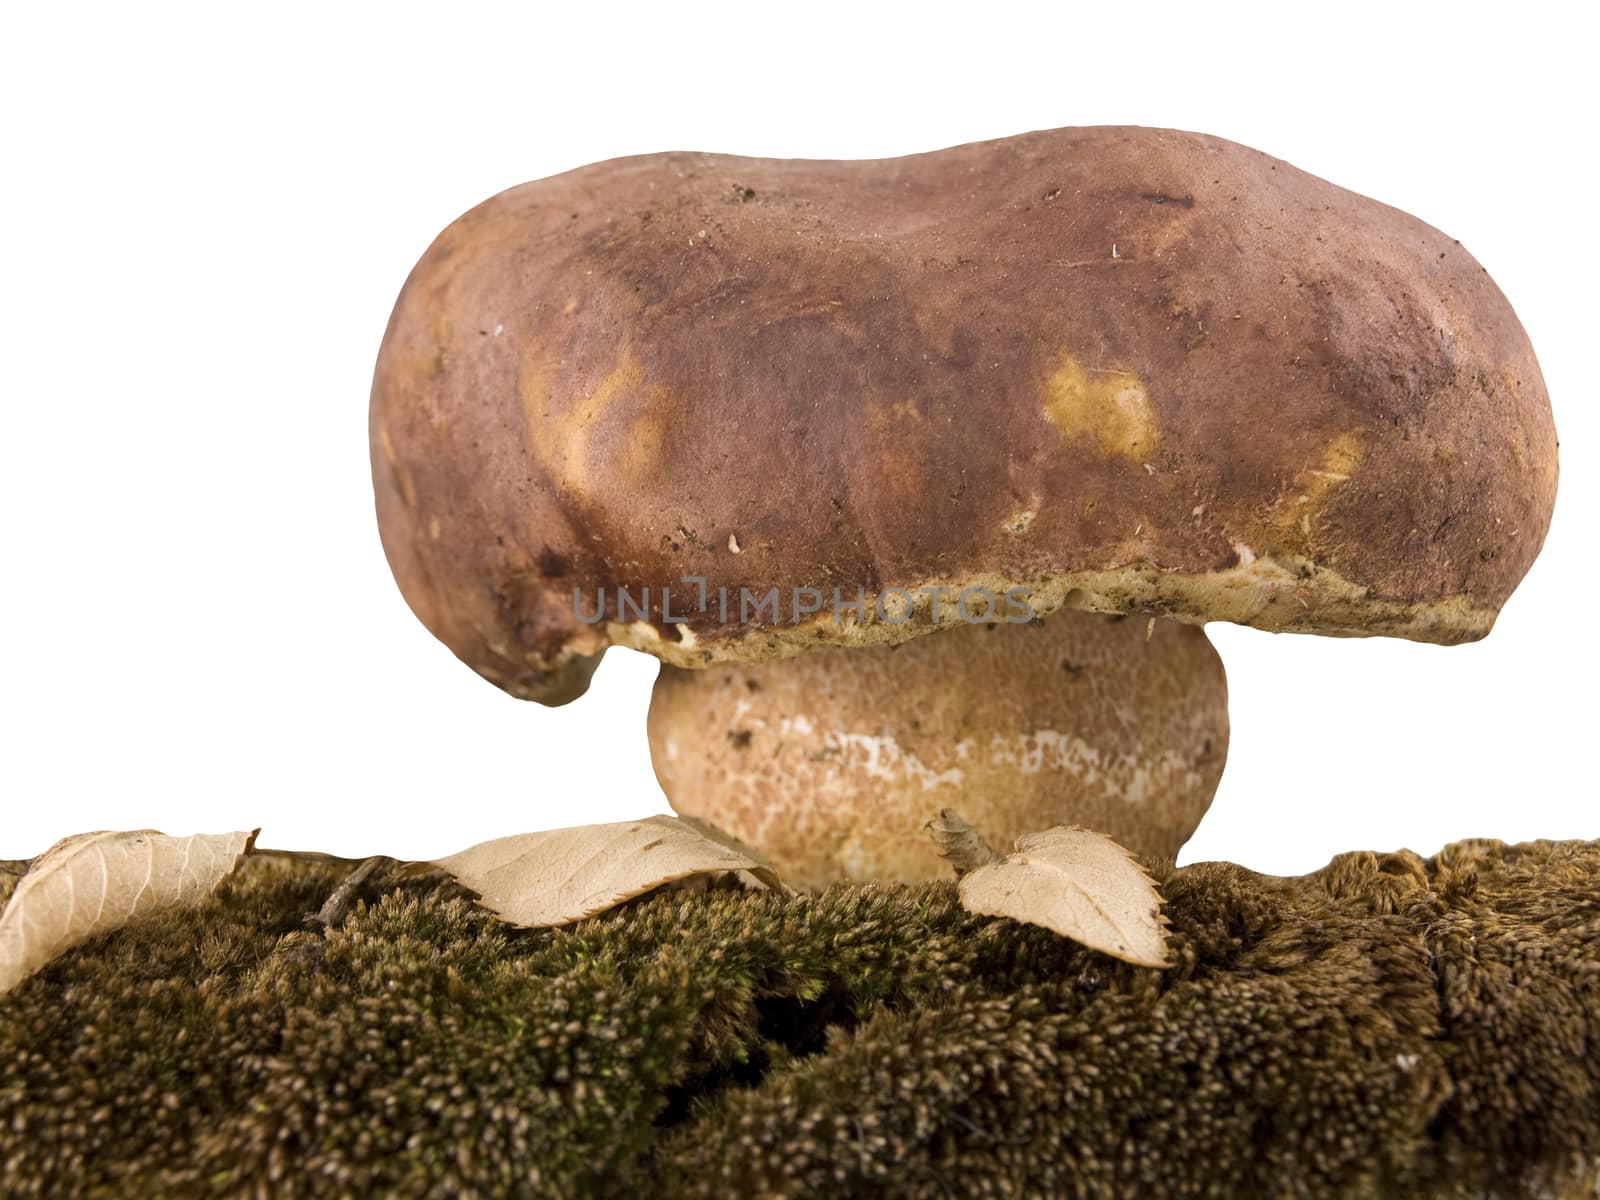 porcini mushroomsand moss isolated on white background by sette